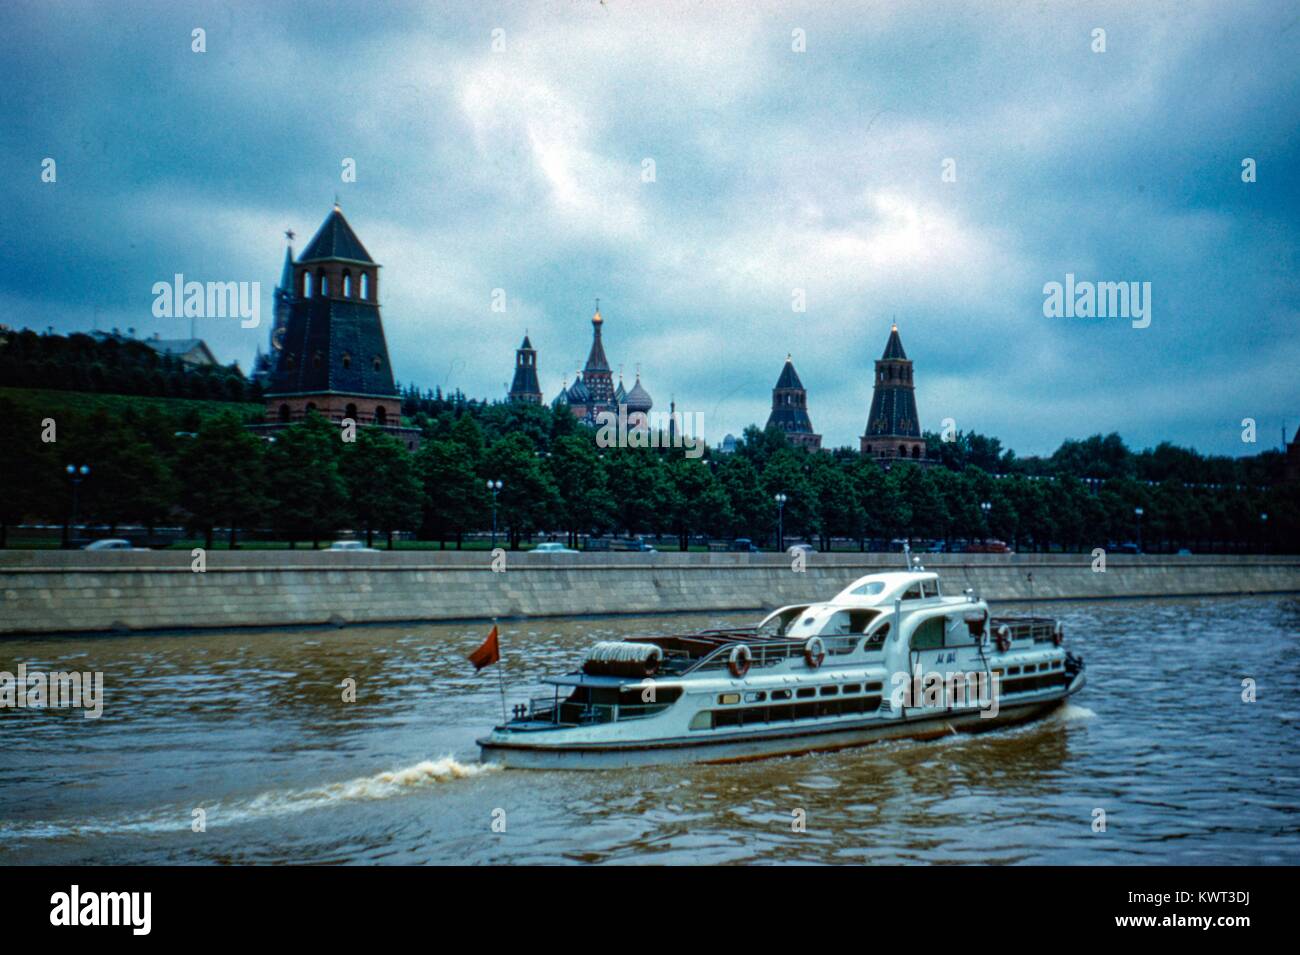 A passenger boat passes through the Moscow River, with towers of the Kremlin visible in the background, on an overcast day under a threatening sky, Moscow, Russia, August, 1959. () Stock Photo